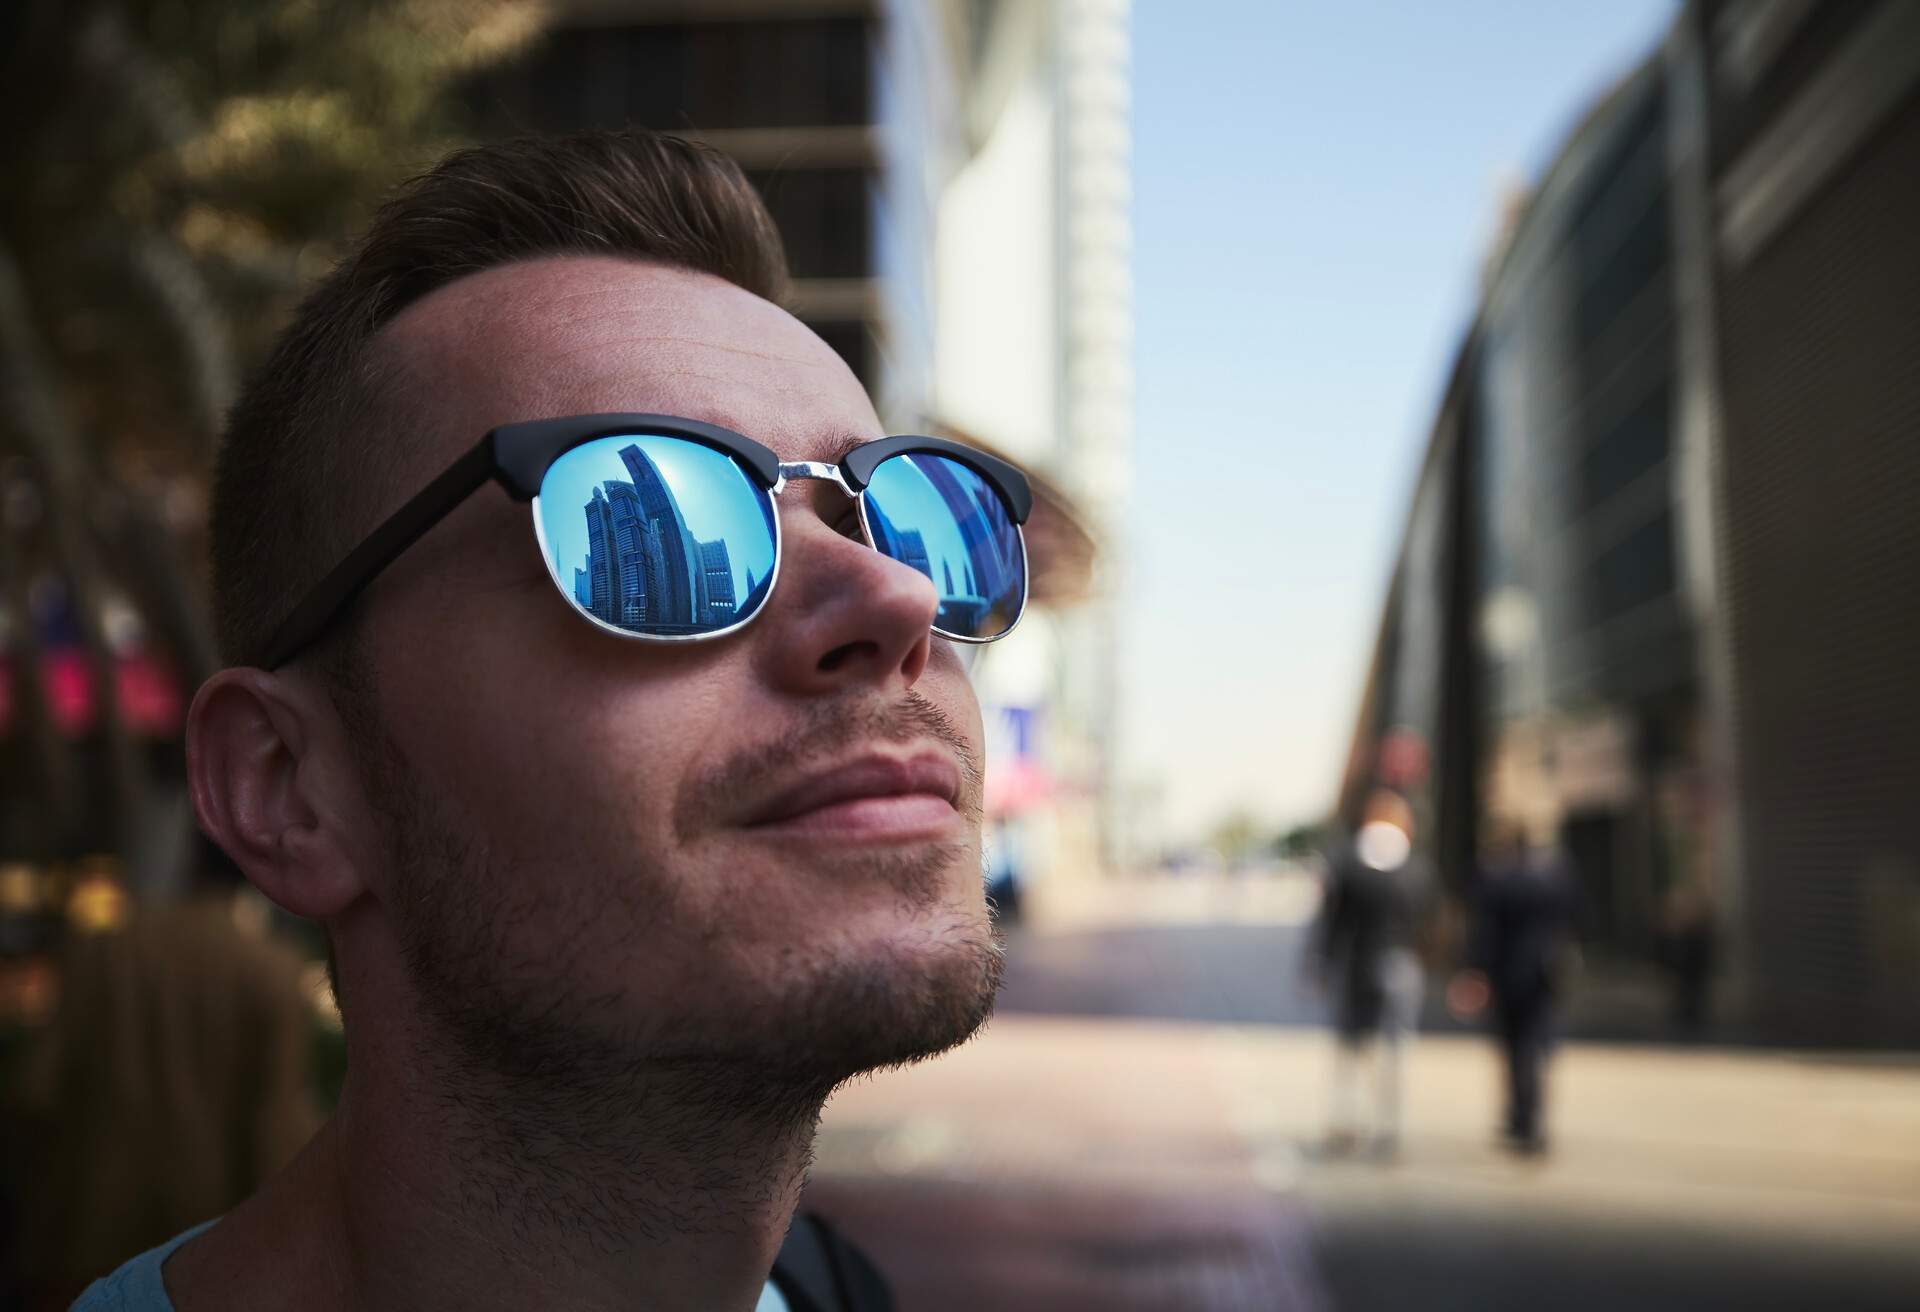 Reflection of skyscrapers in sunglasses. Portrait of young man on city street. Traveler in Dubai, United Arab Emirates.